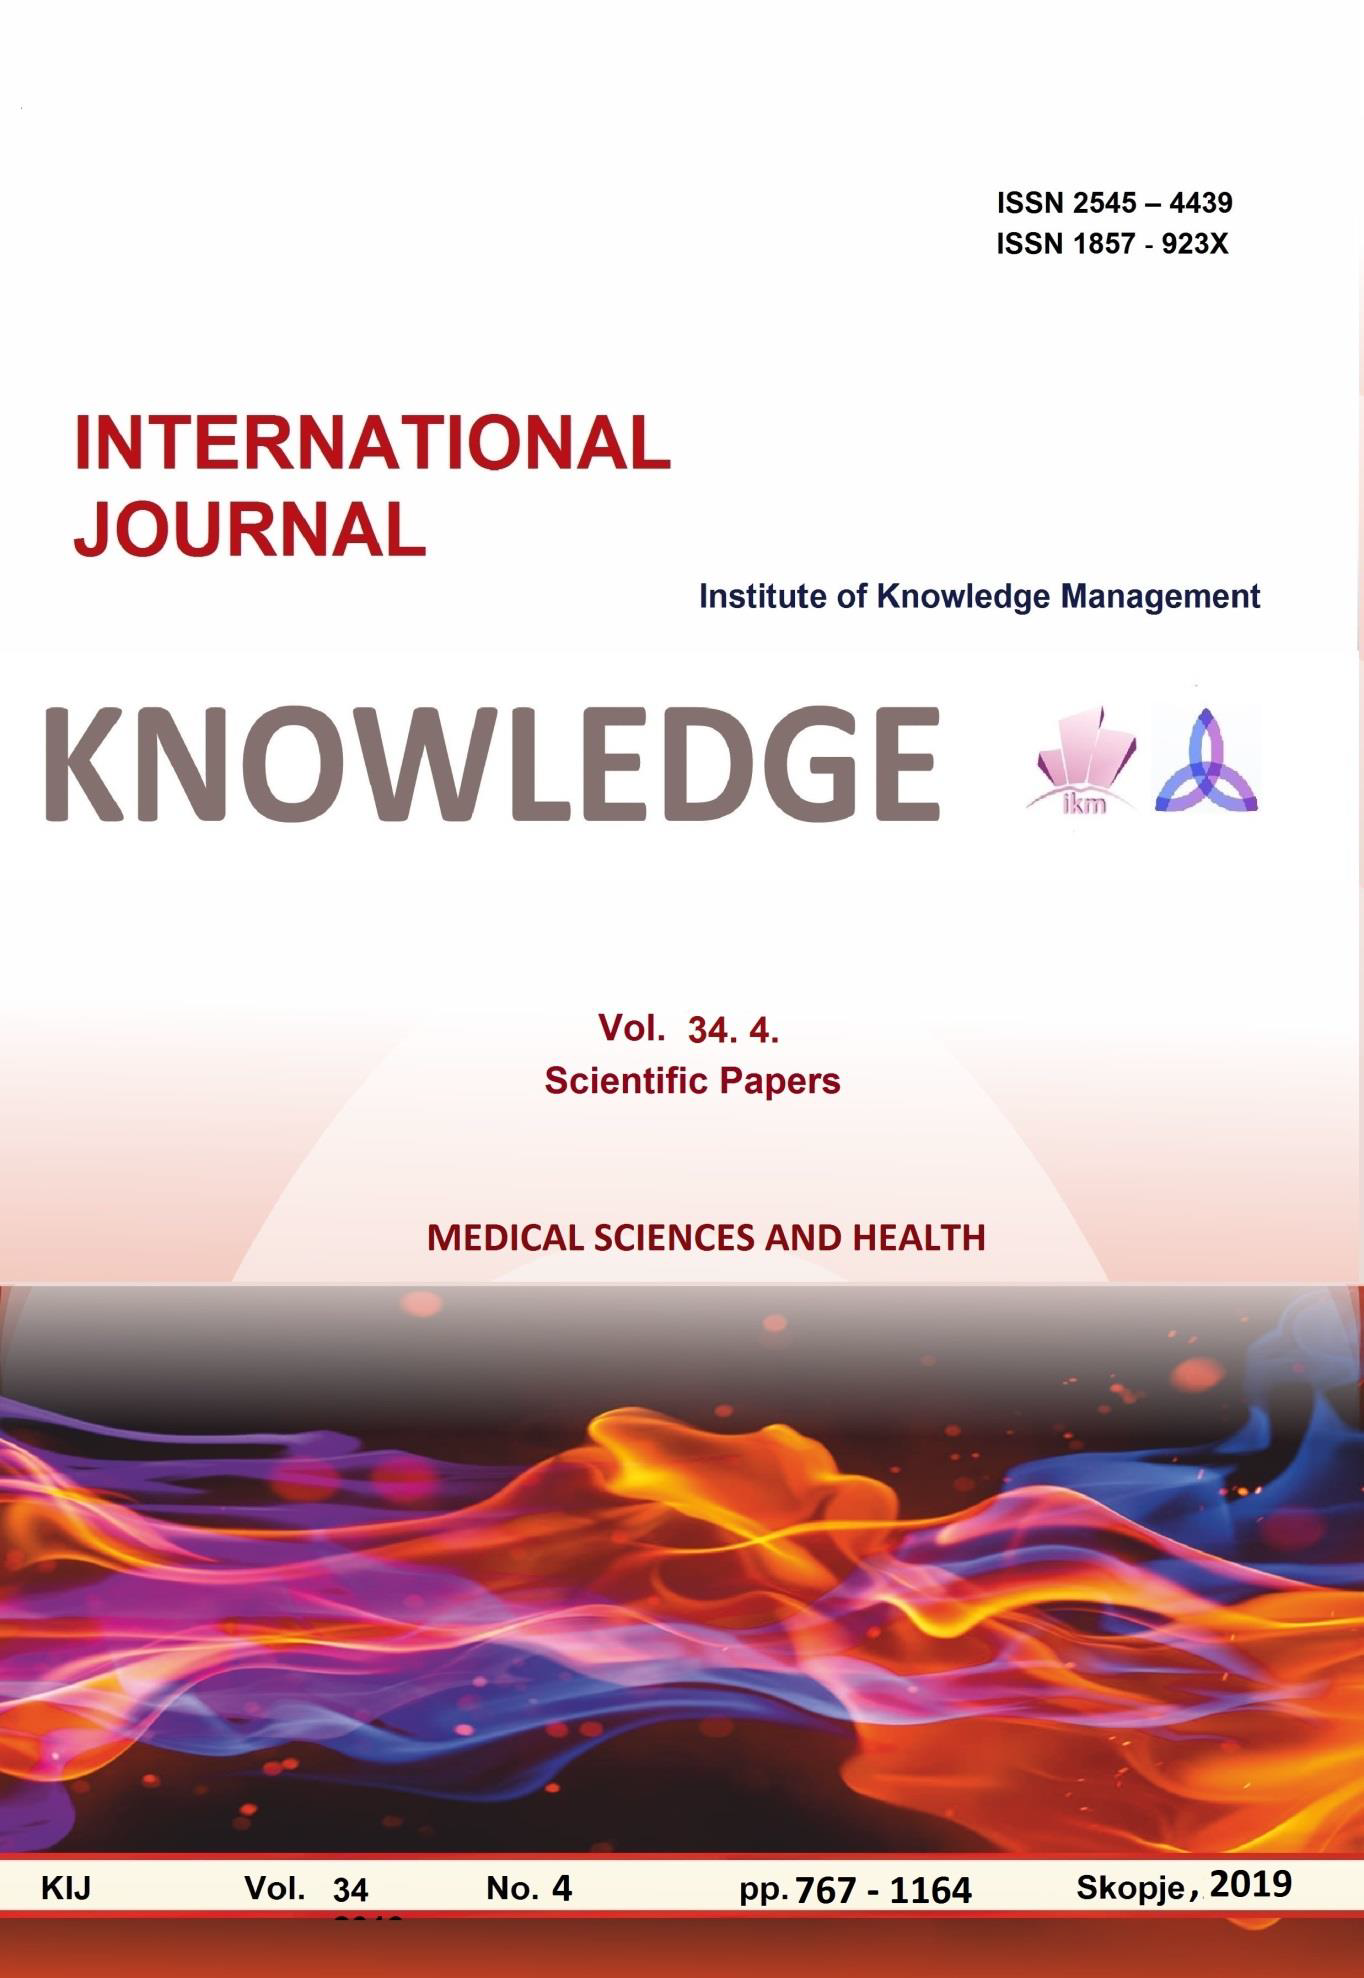 					View Vol. 34 No. 4 (2019): Knowledge without borders
				